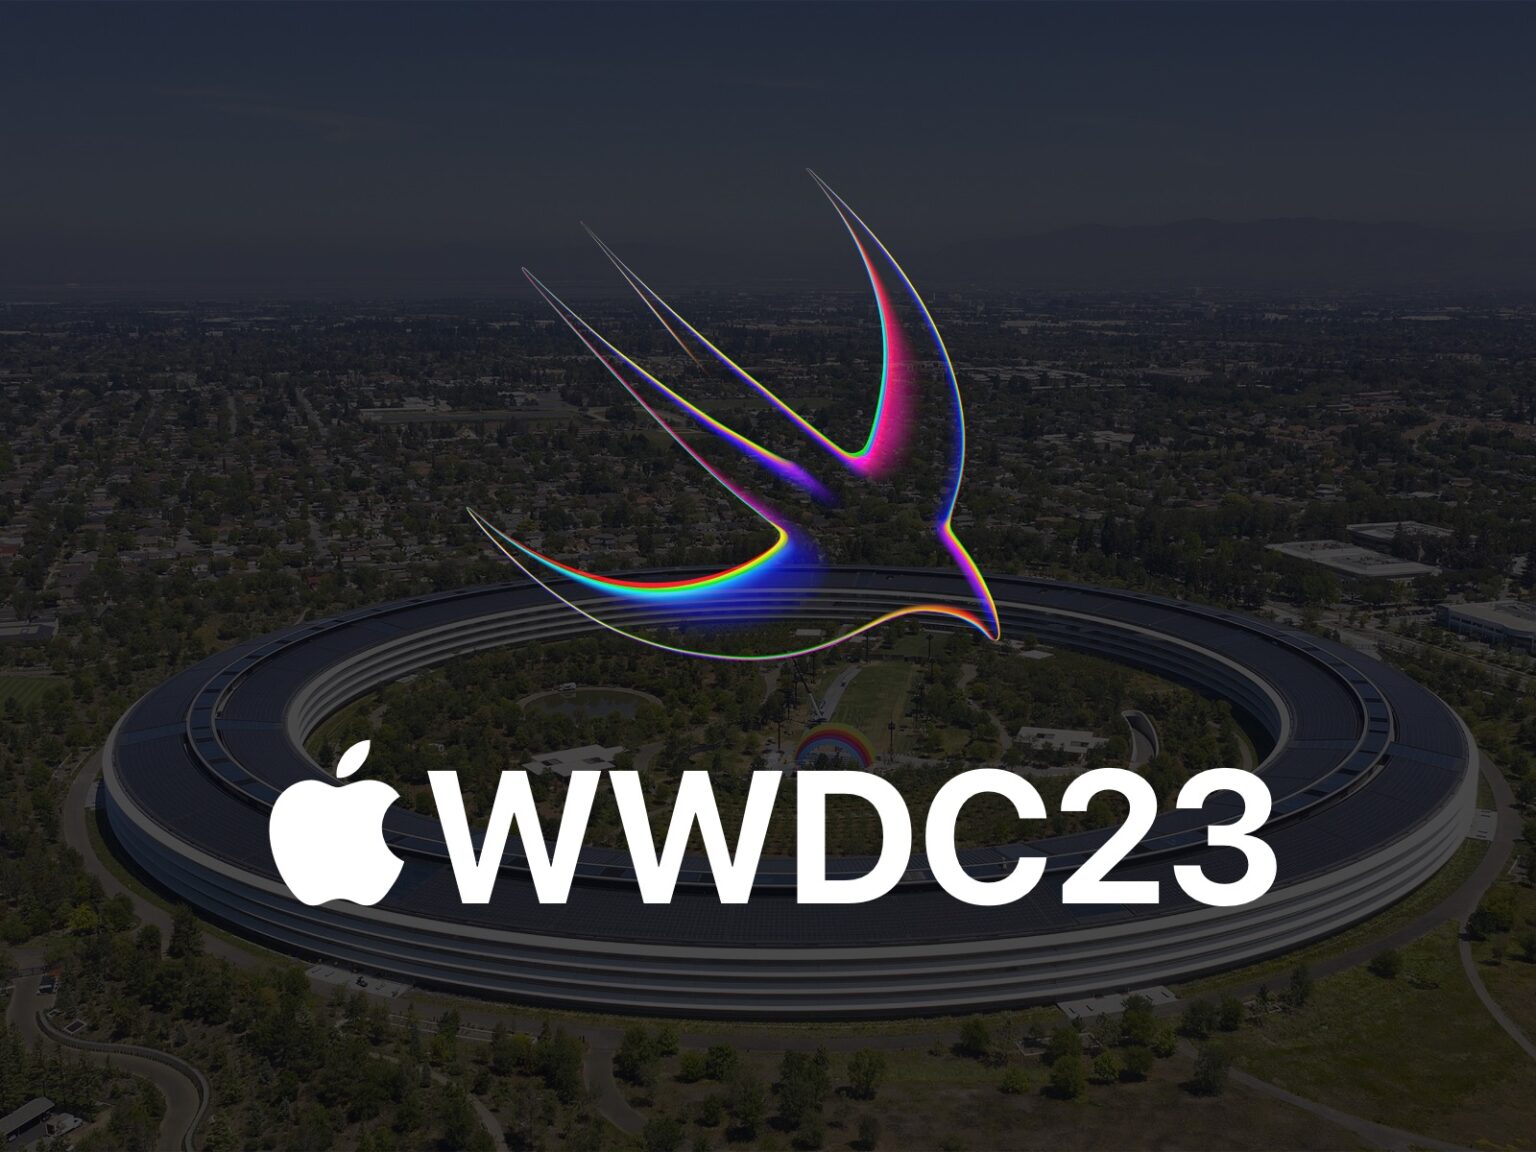 WWDC23 logo over aerial photo of Apple Park